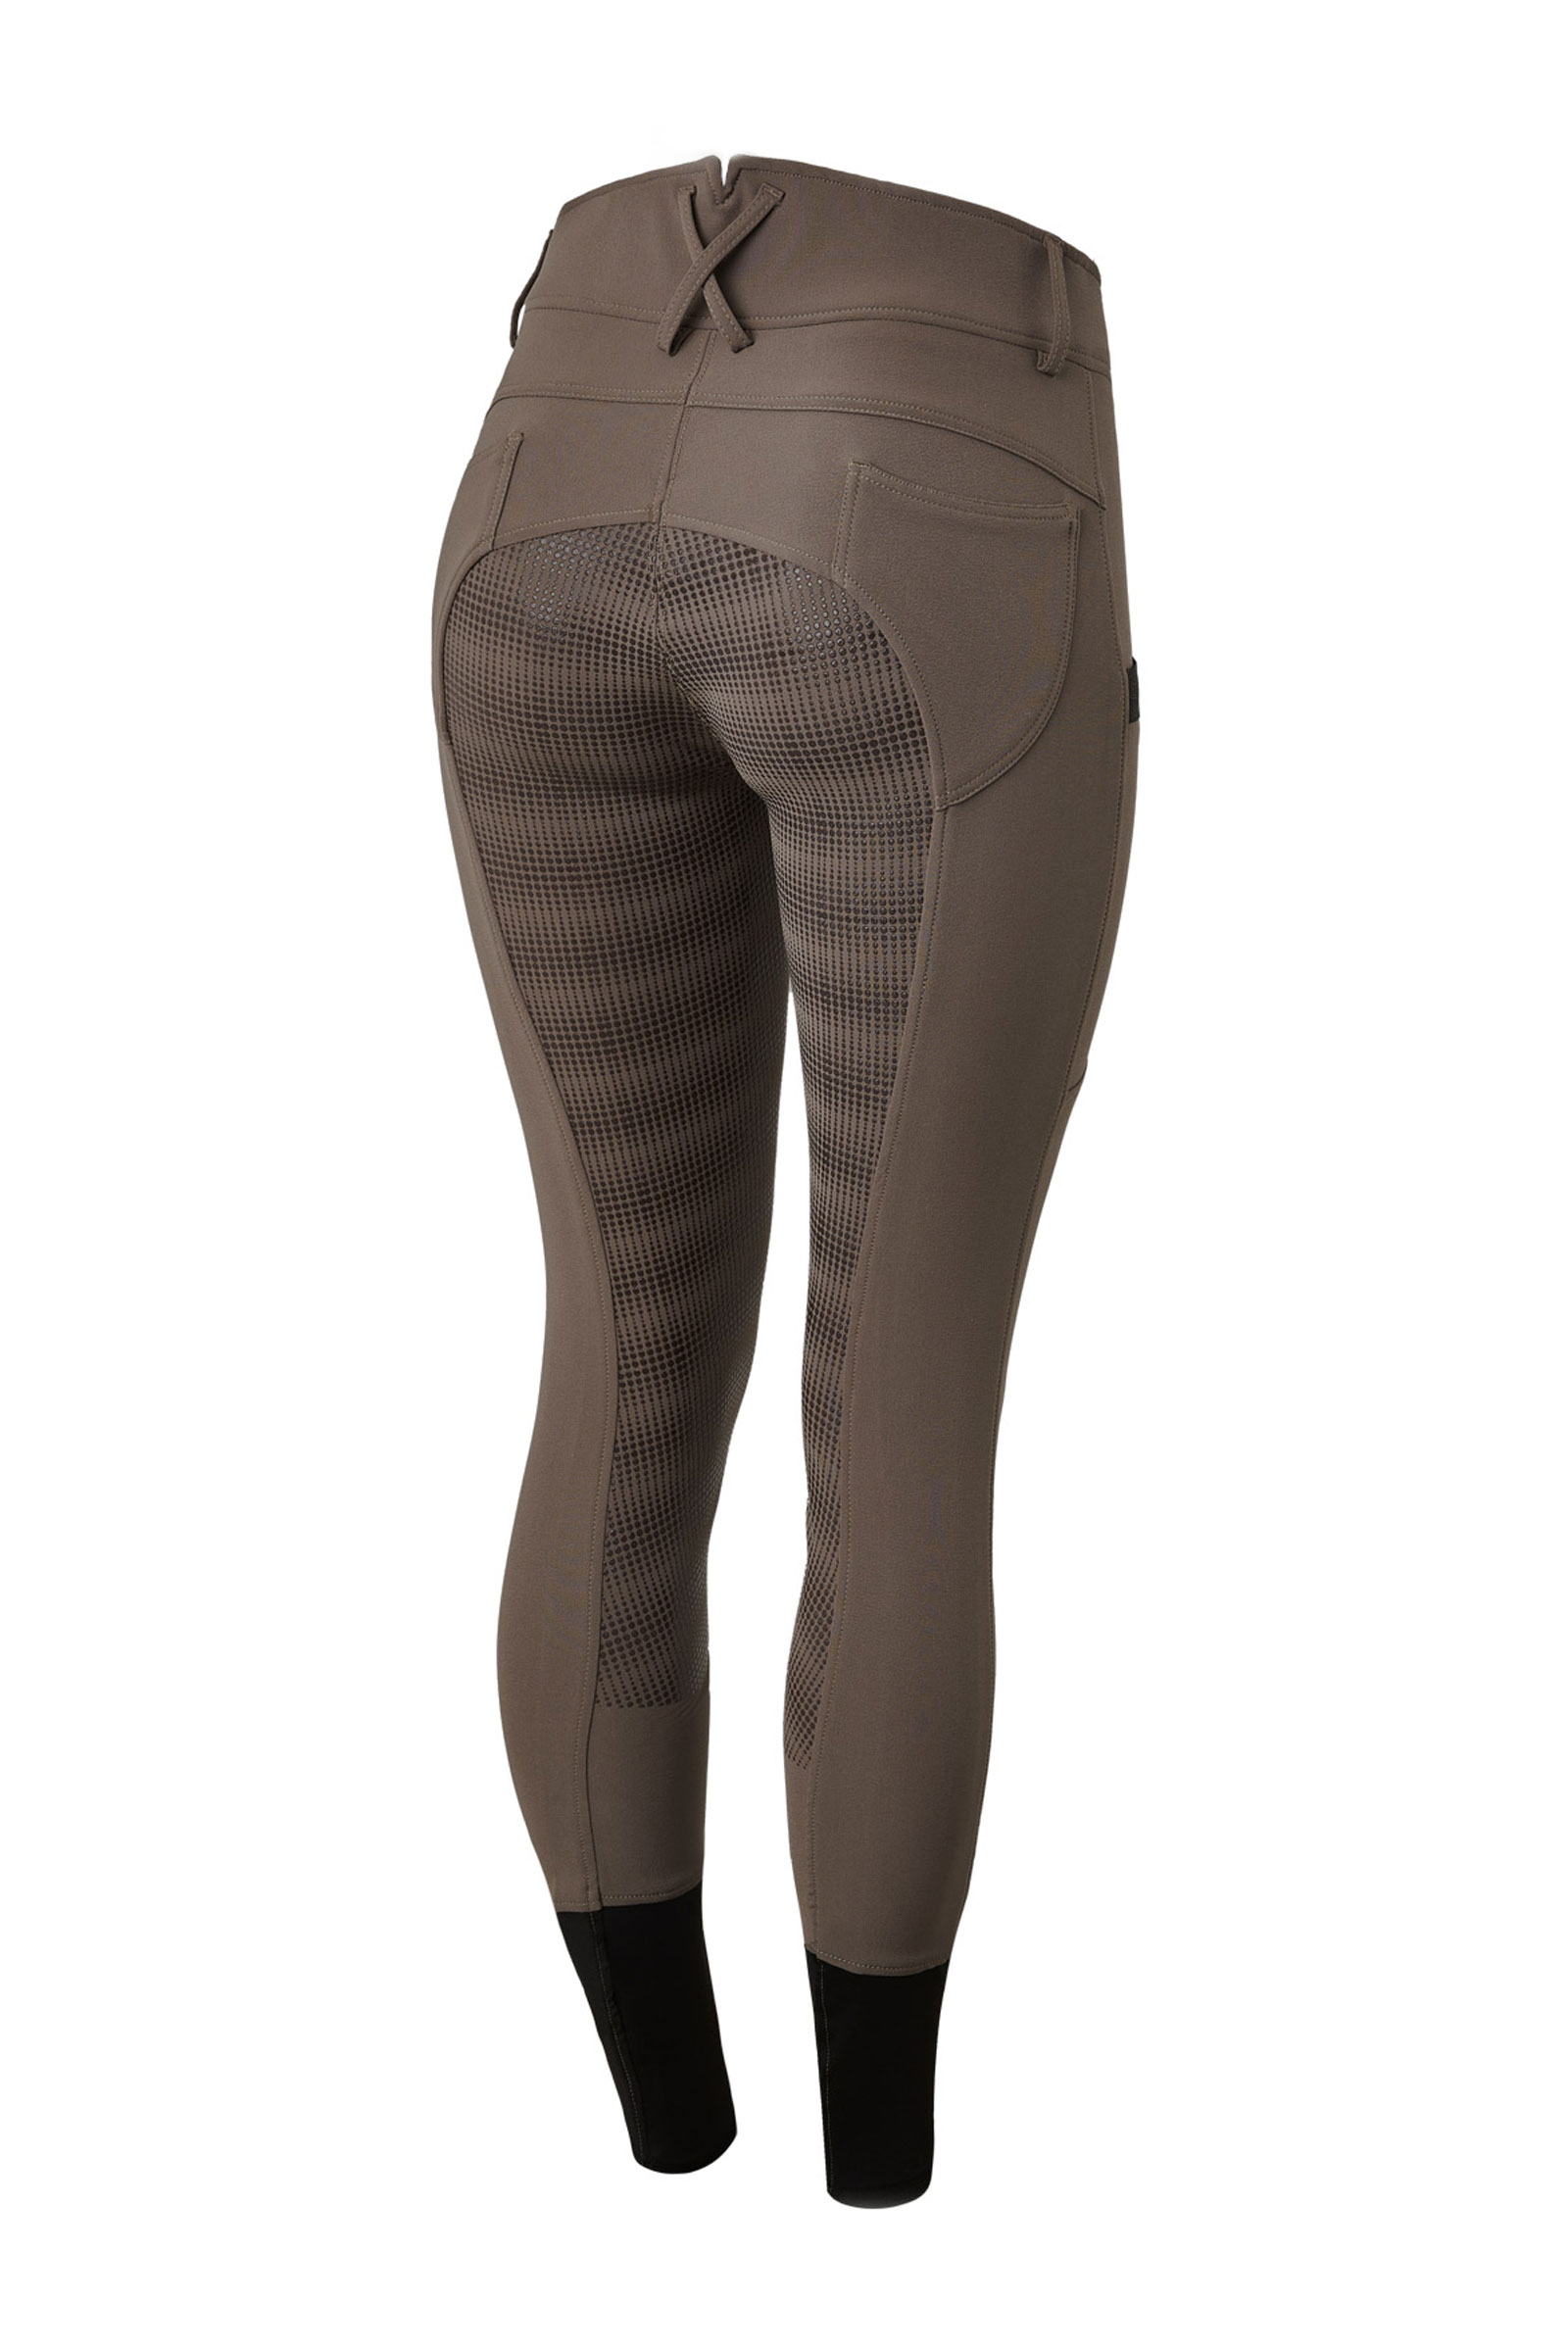 Horze Ada Women's Silicone Full Seat Breeches with Phone Pocket - Grey -  Horse and Rider Supplies